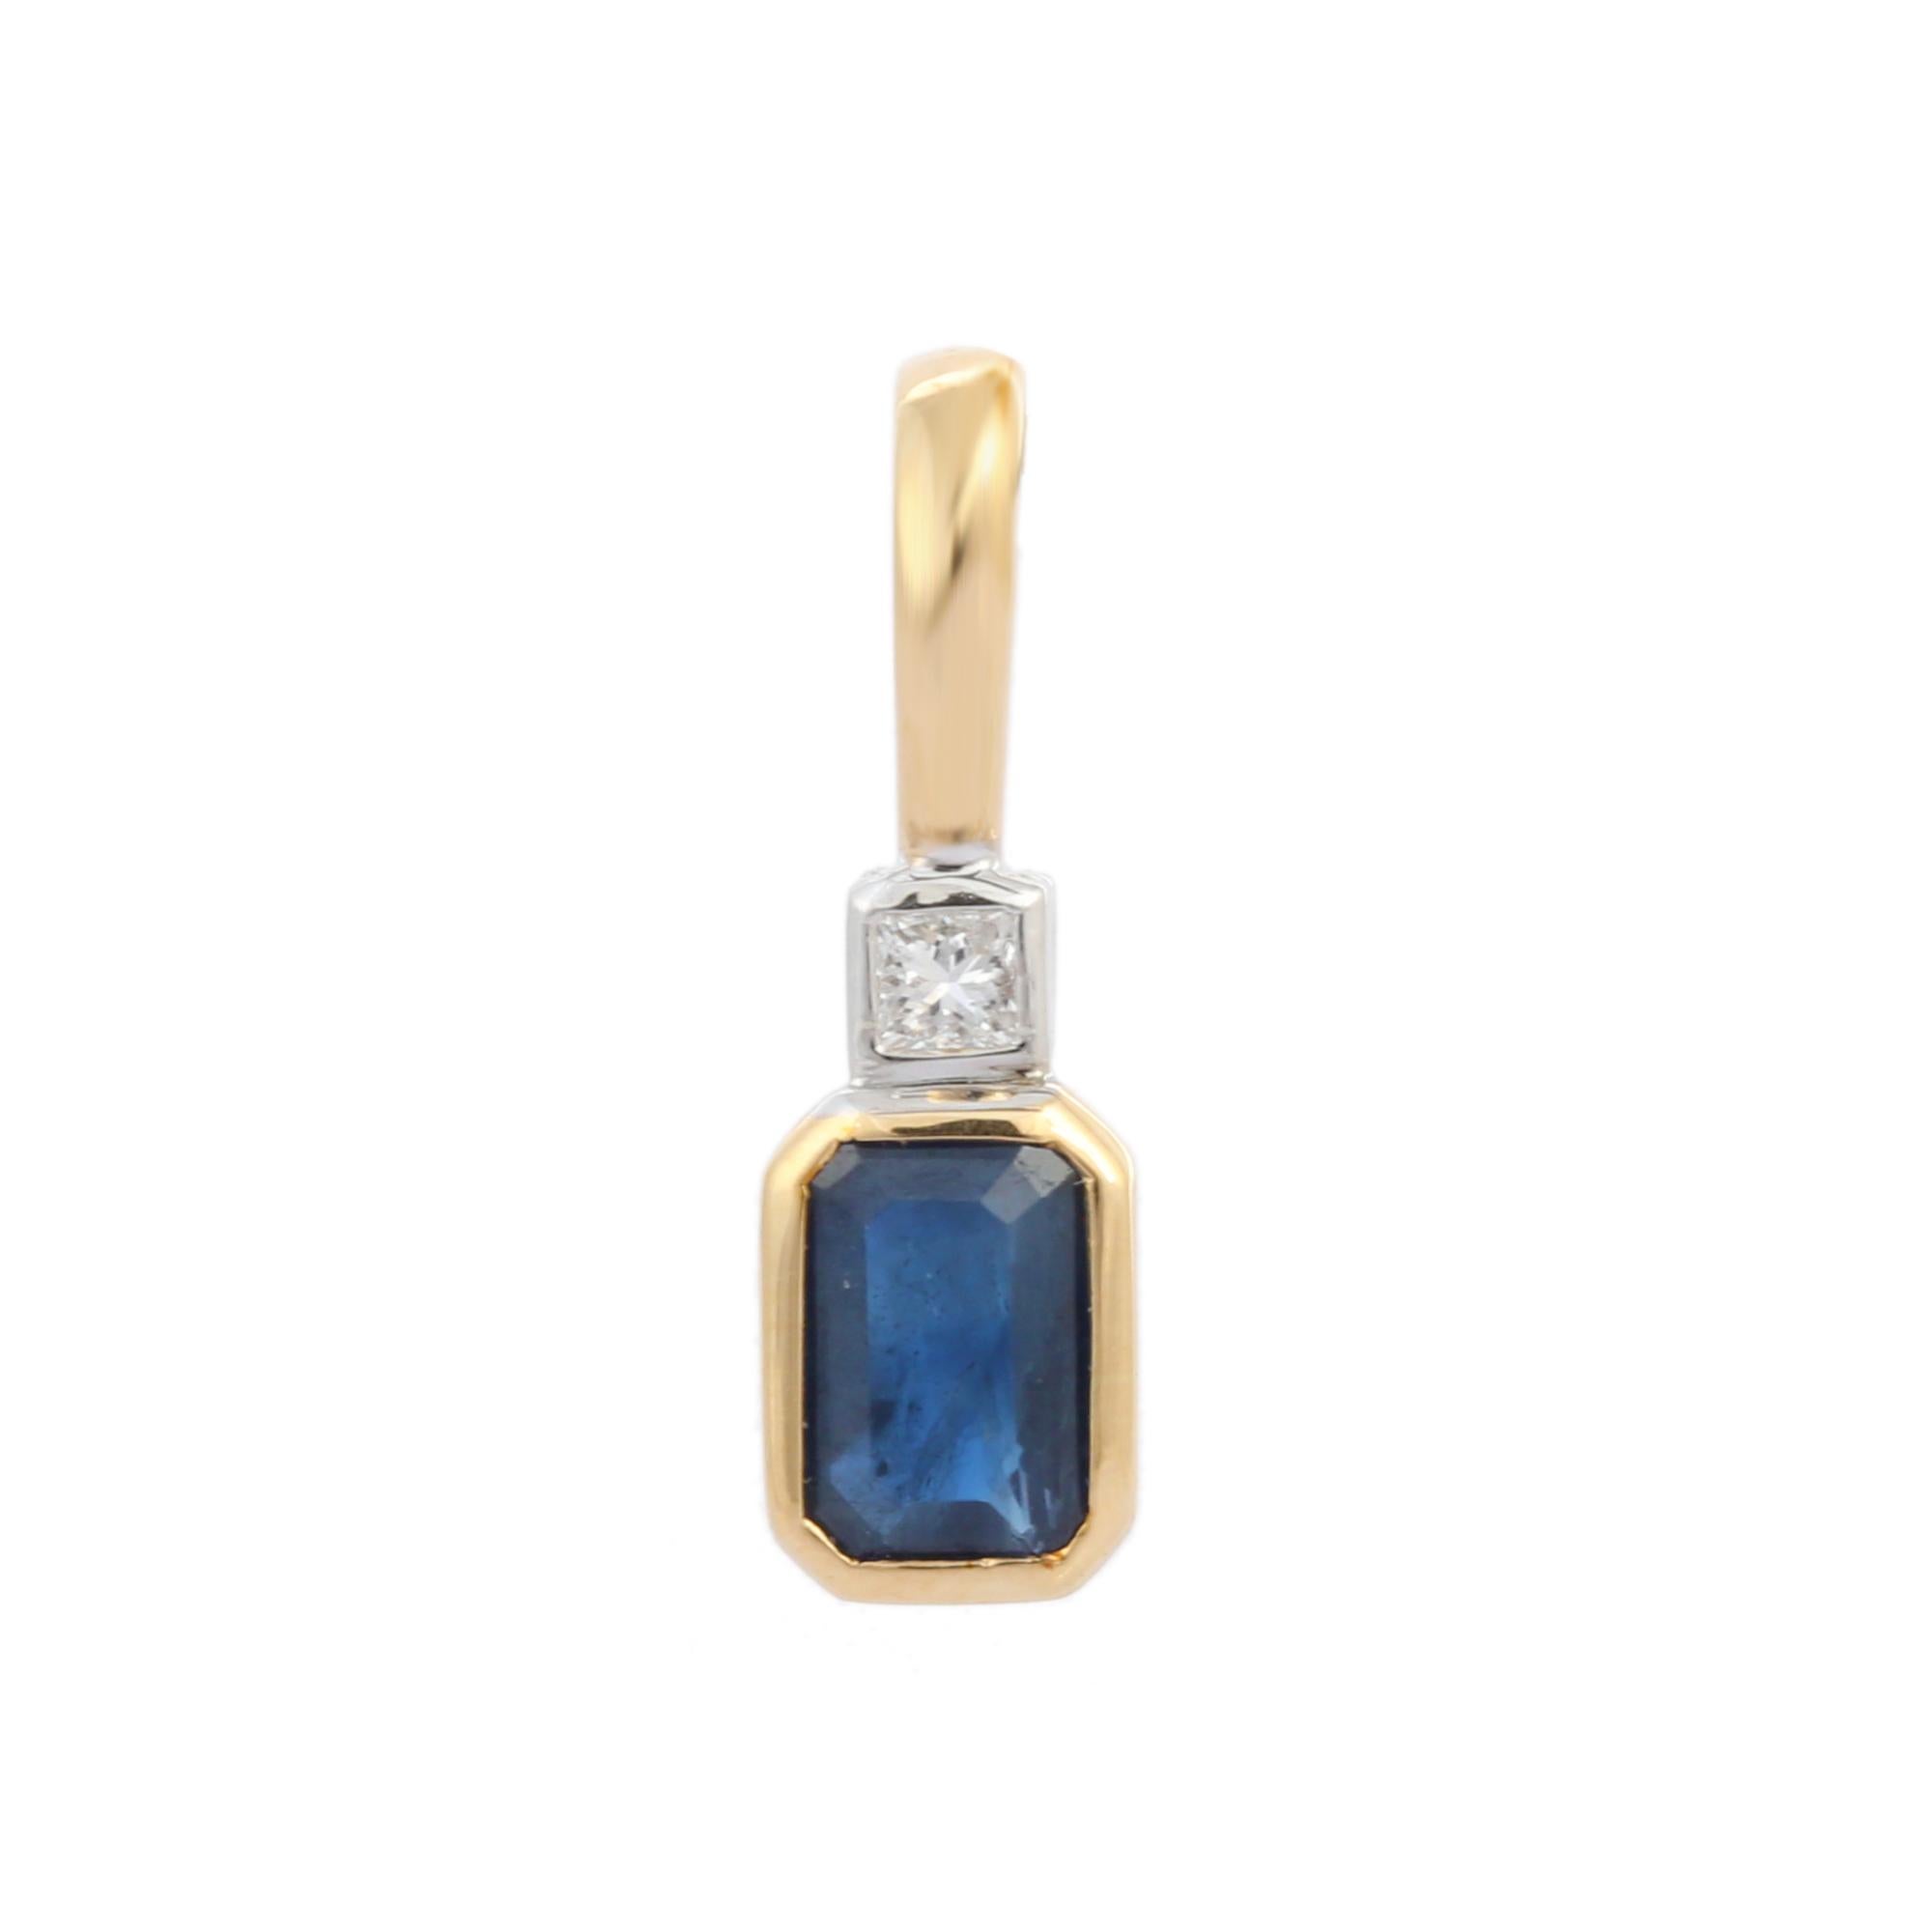 Natural Blue Sapphire and Diamond pendant in 18K Gold. It has octagon cut sapphire with diamond that completes your look with a decent touch. Pendants are used to wear or gifted to represent love and promises. It's an attractive jewelry piece that